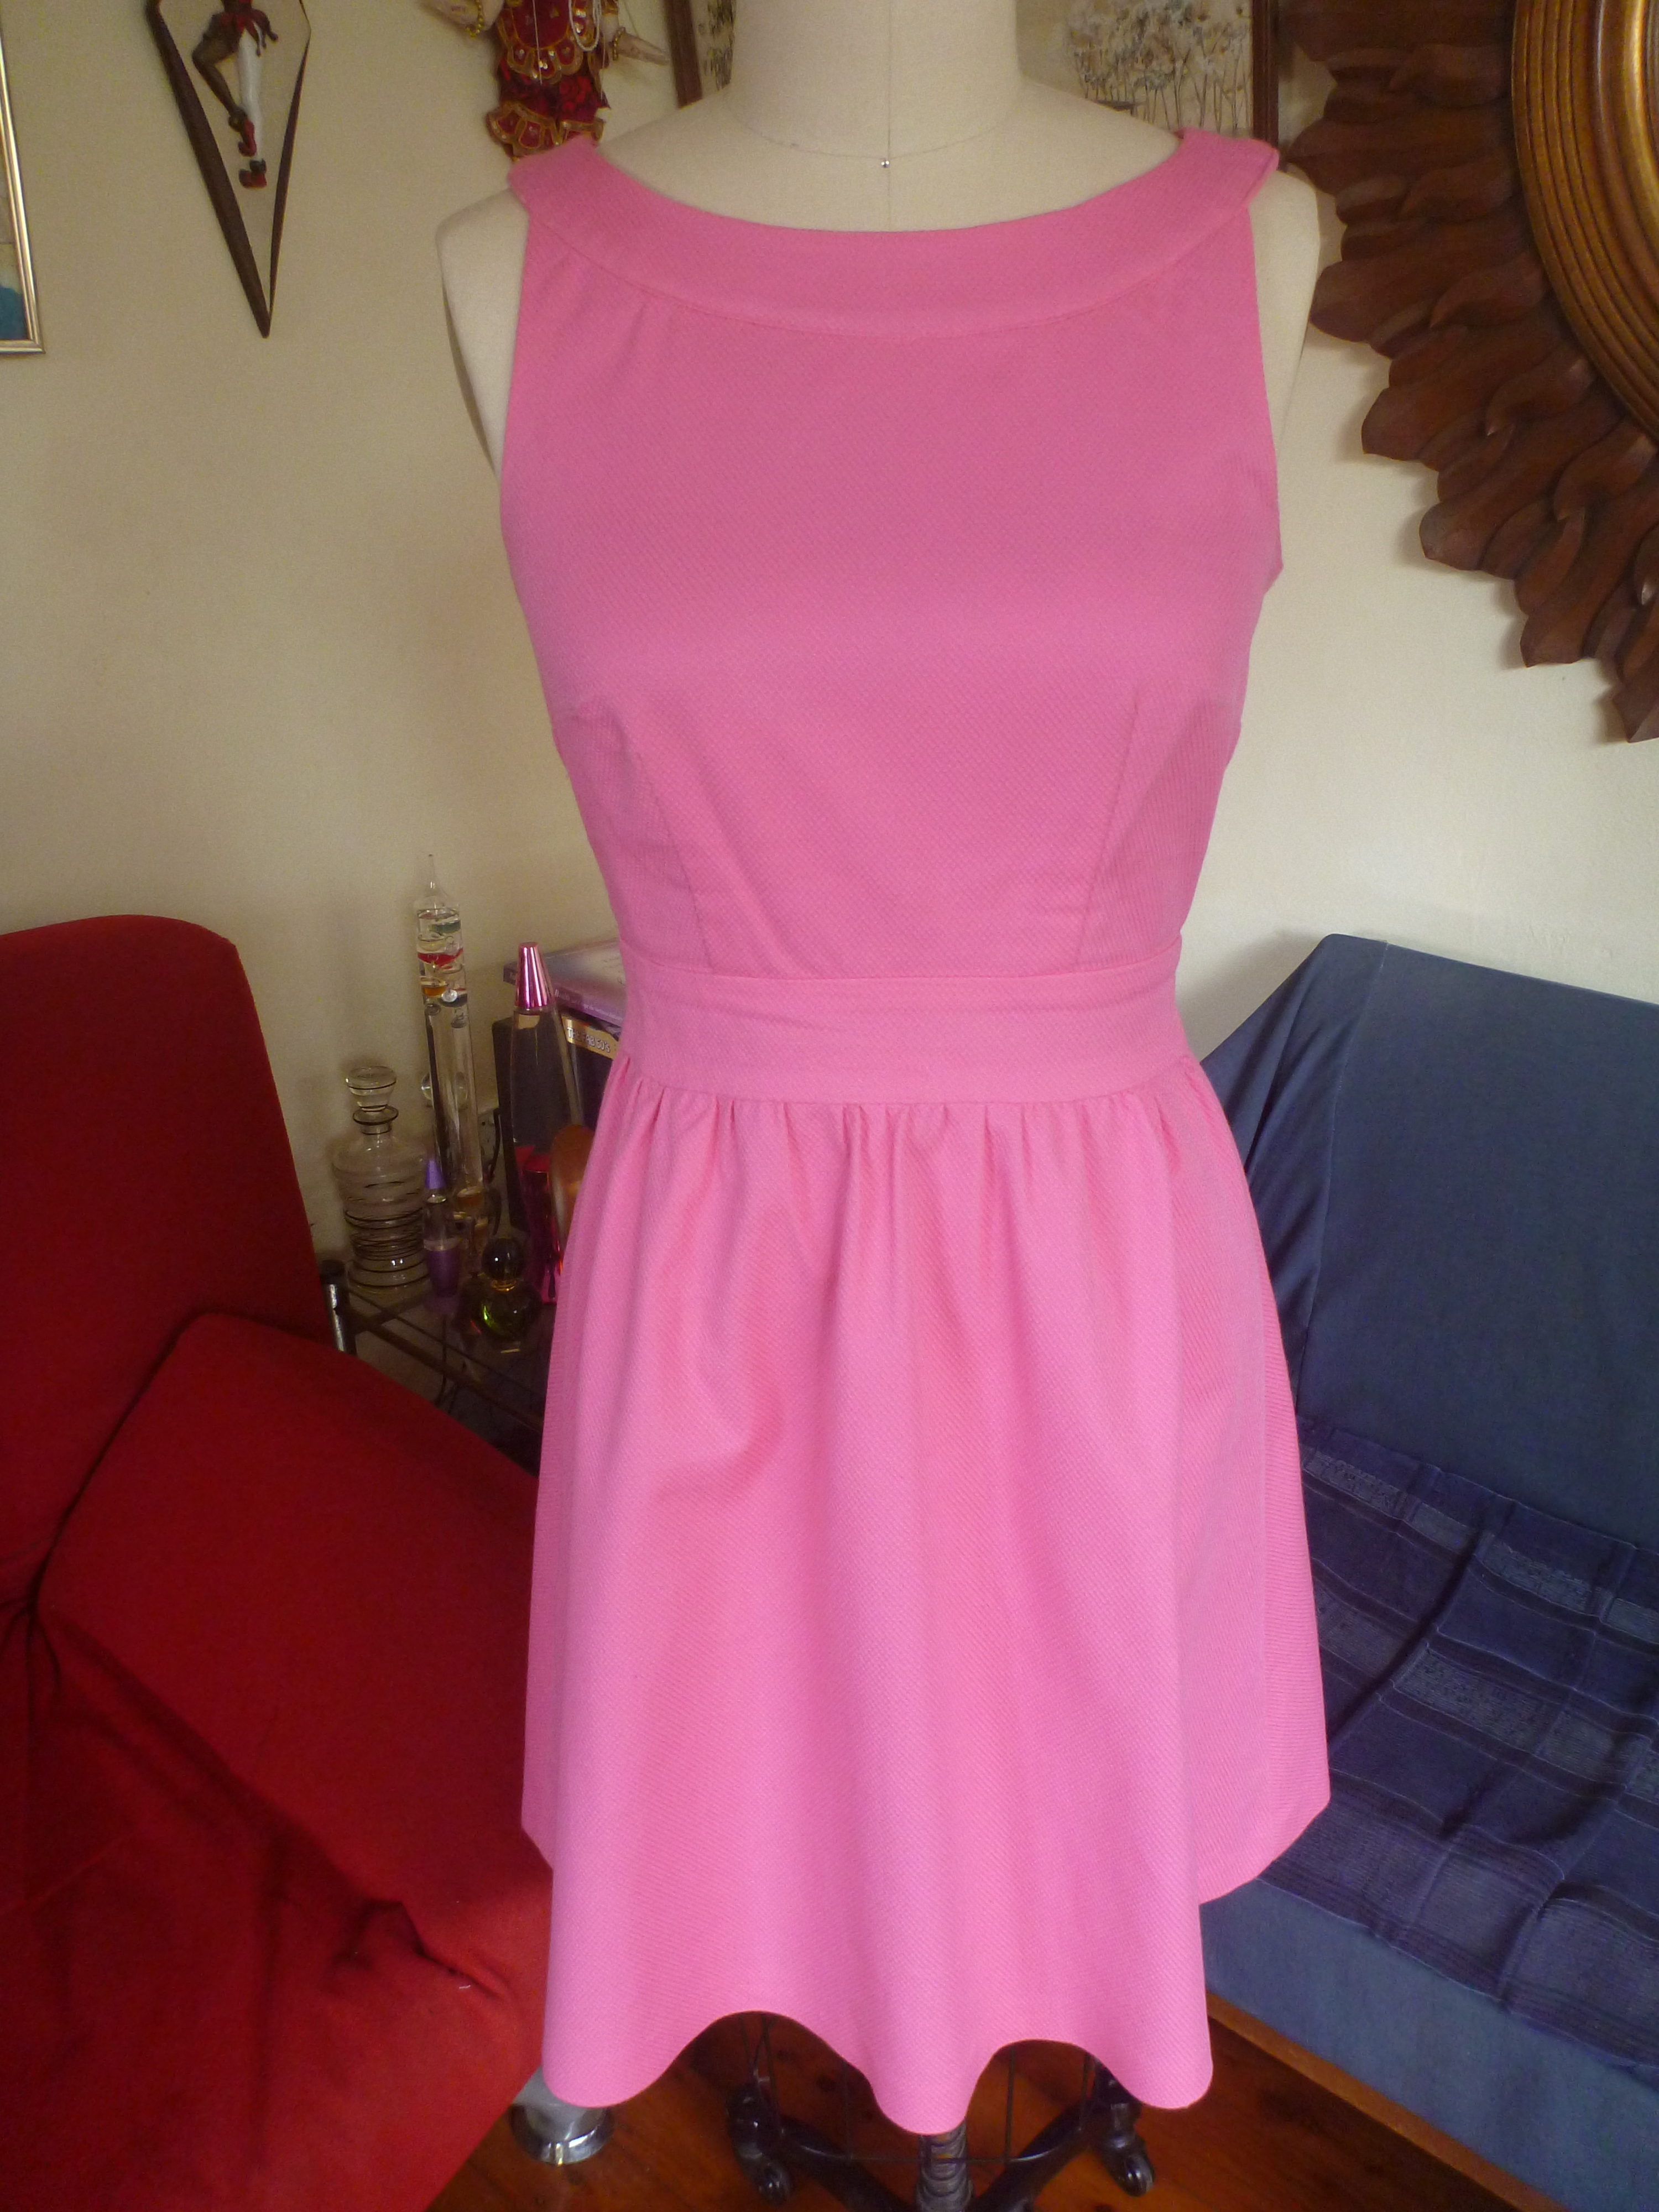 Pink Pique Dress – Sewing Projects | BurdaStyle.com